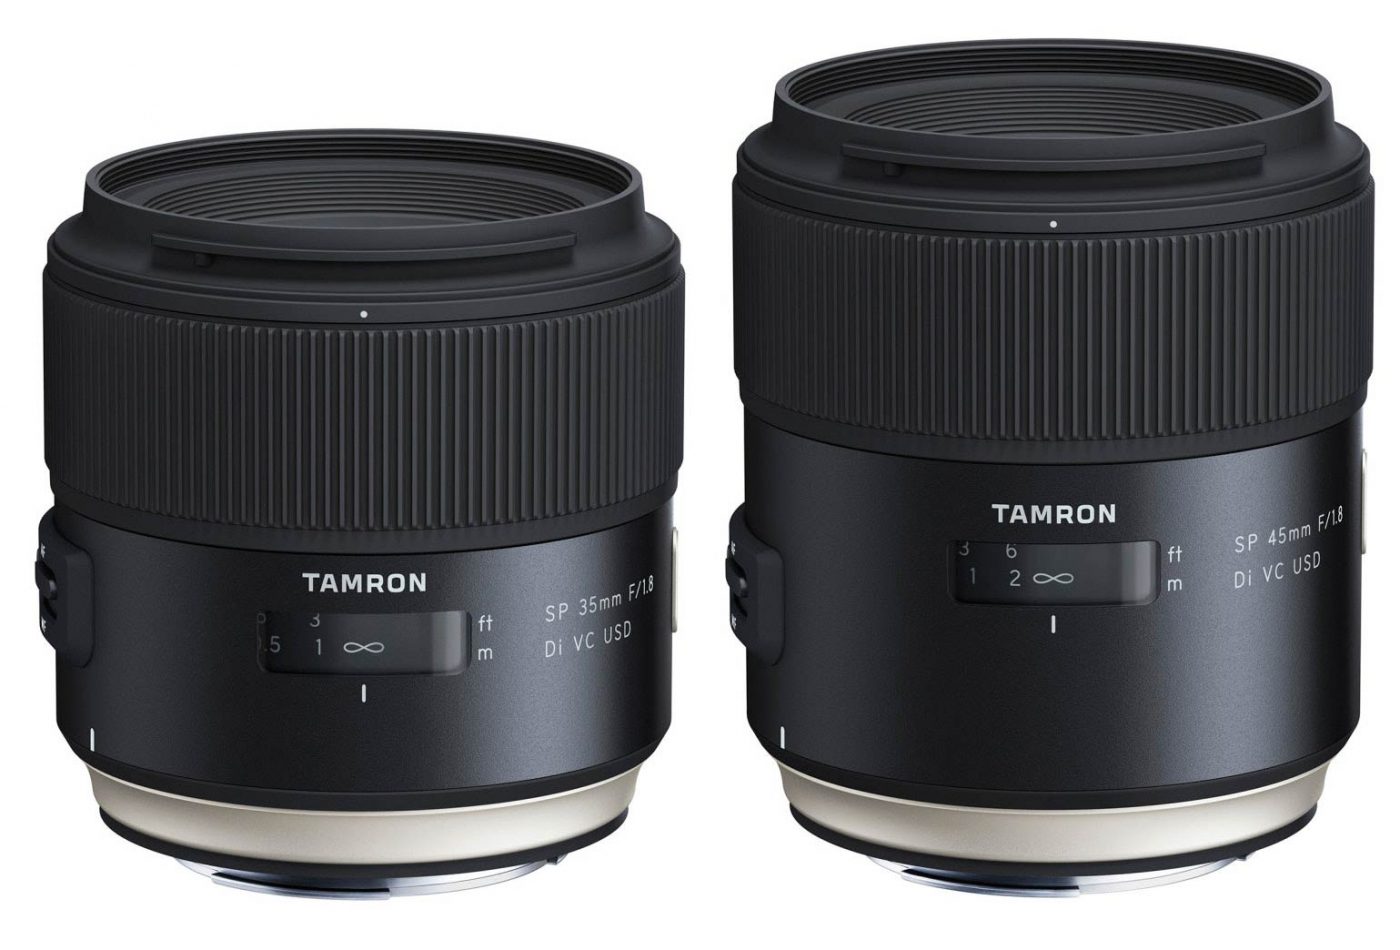 Tamron SP 35mm f/1.8 VC USD and 45mm f/1.8 VC USD